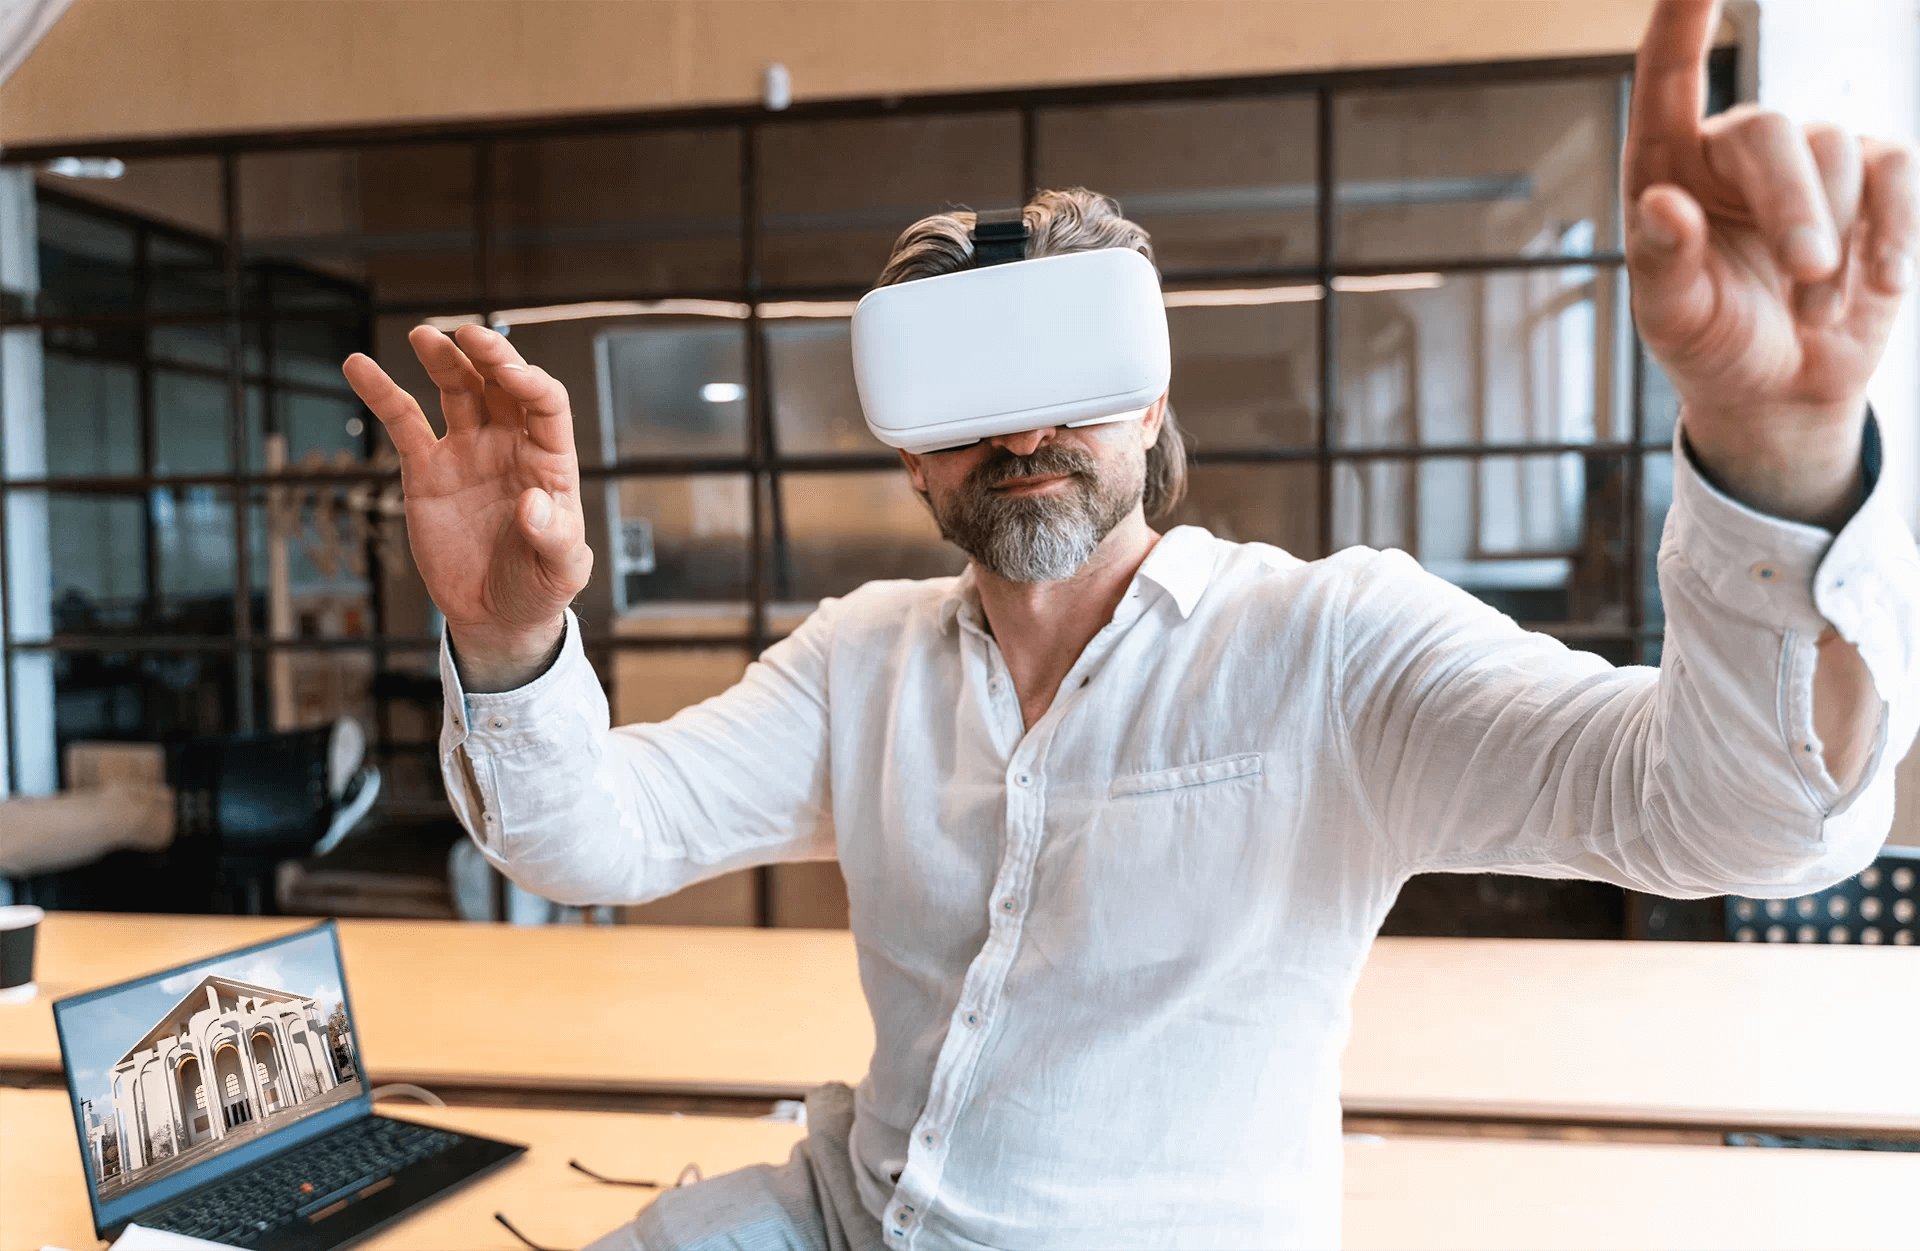 Difference between Augmented Reality and Virtual Reality in Architecture